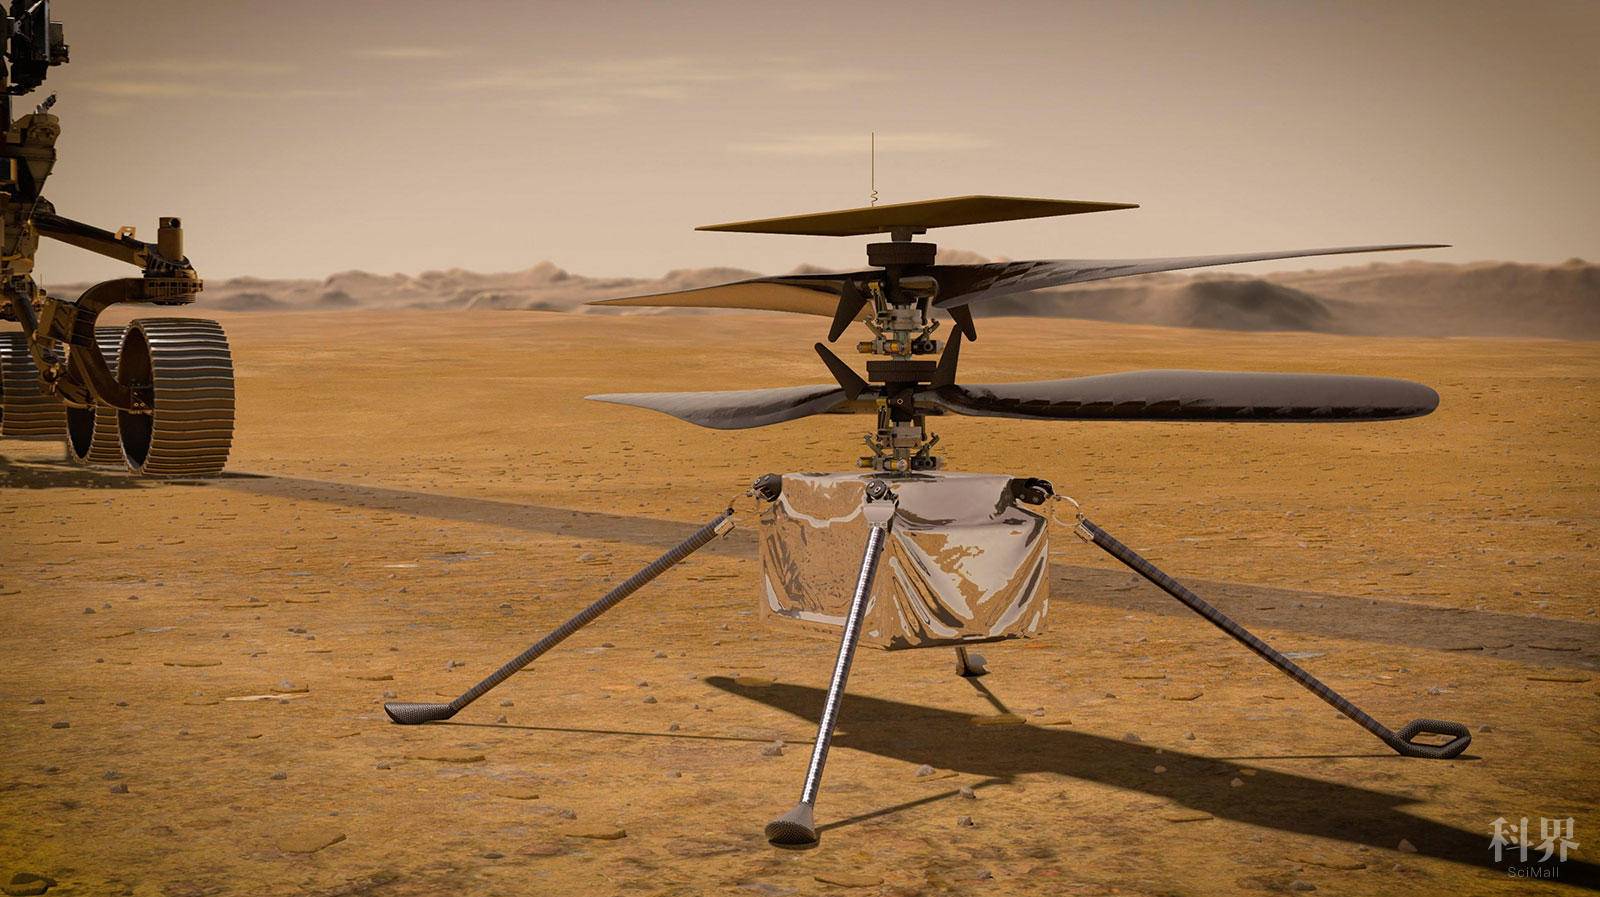 UNSPECIFIED: In this concept illustration provided by NASA, NASA's Ingenuity Mars Helicopter stands on the Red Planet's surface as NASA's Mars 2020 Perseverance rover (partially visible on the left) rolls away. NASA's Perseverance (Mars 2020) rover will store rock and soil samples in sealed tubes on the planet's surface for future missions to retrieve in the area known as Jezero crater on the planet Mars. A key objective for Perseverance's mission on Mars is astrobiology, including the search for signs of ancient microbial life. The rover will characterize the planet's geology and past climate, paving the way for human exploration of the Red Planet, and be the first mission to collect and cache Martian rock and regolith. (Photo illustration by NASA via Getty Images)